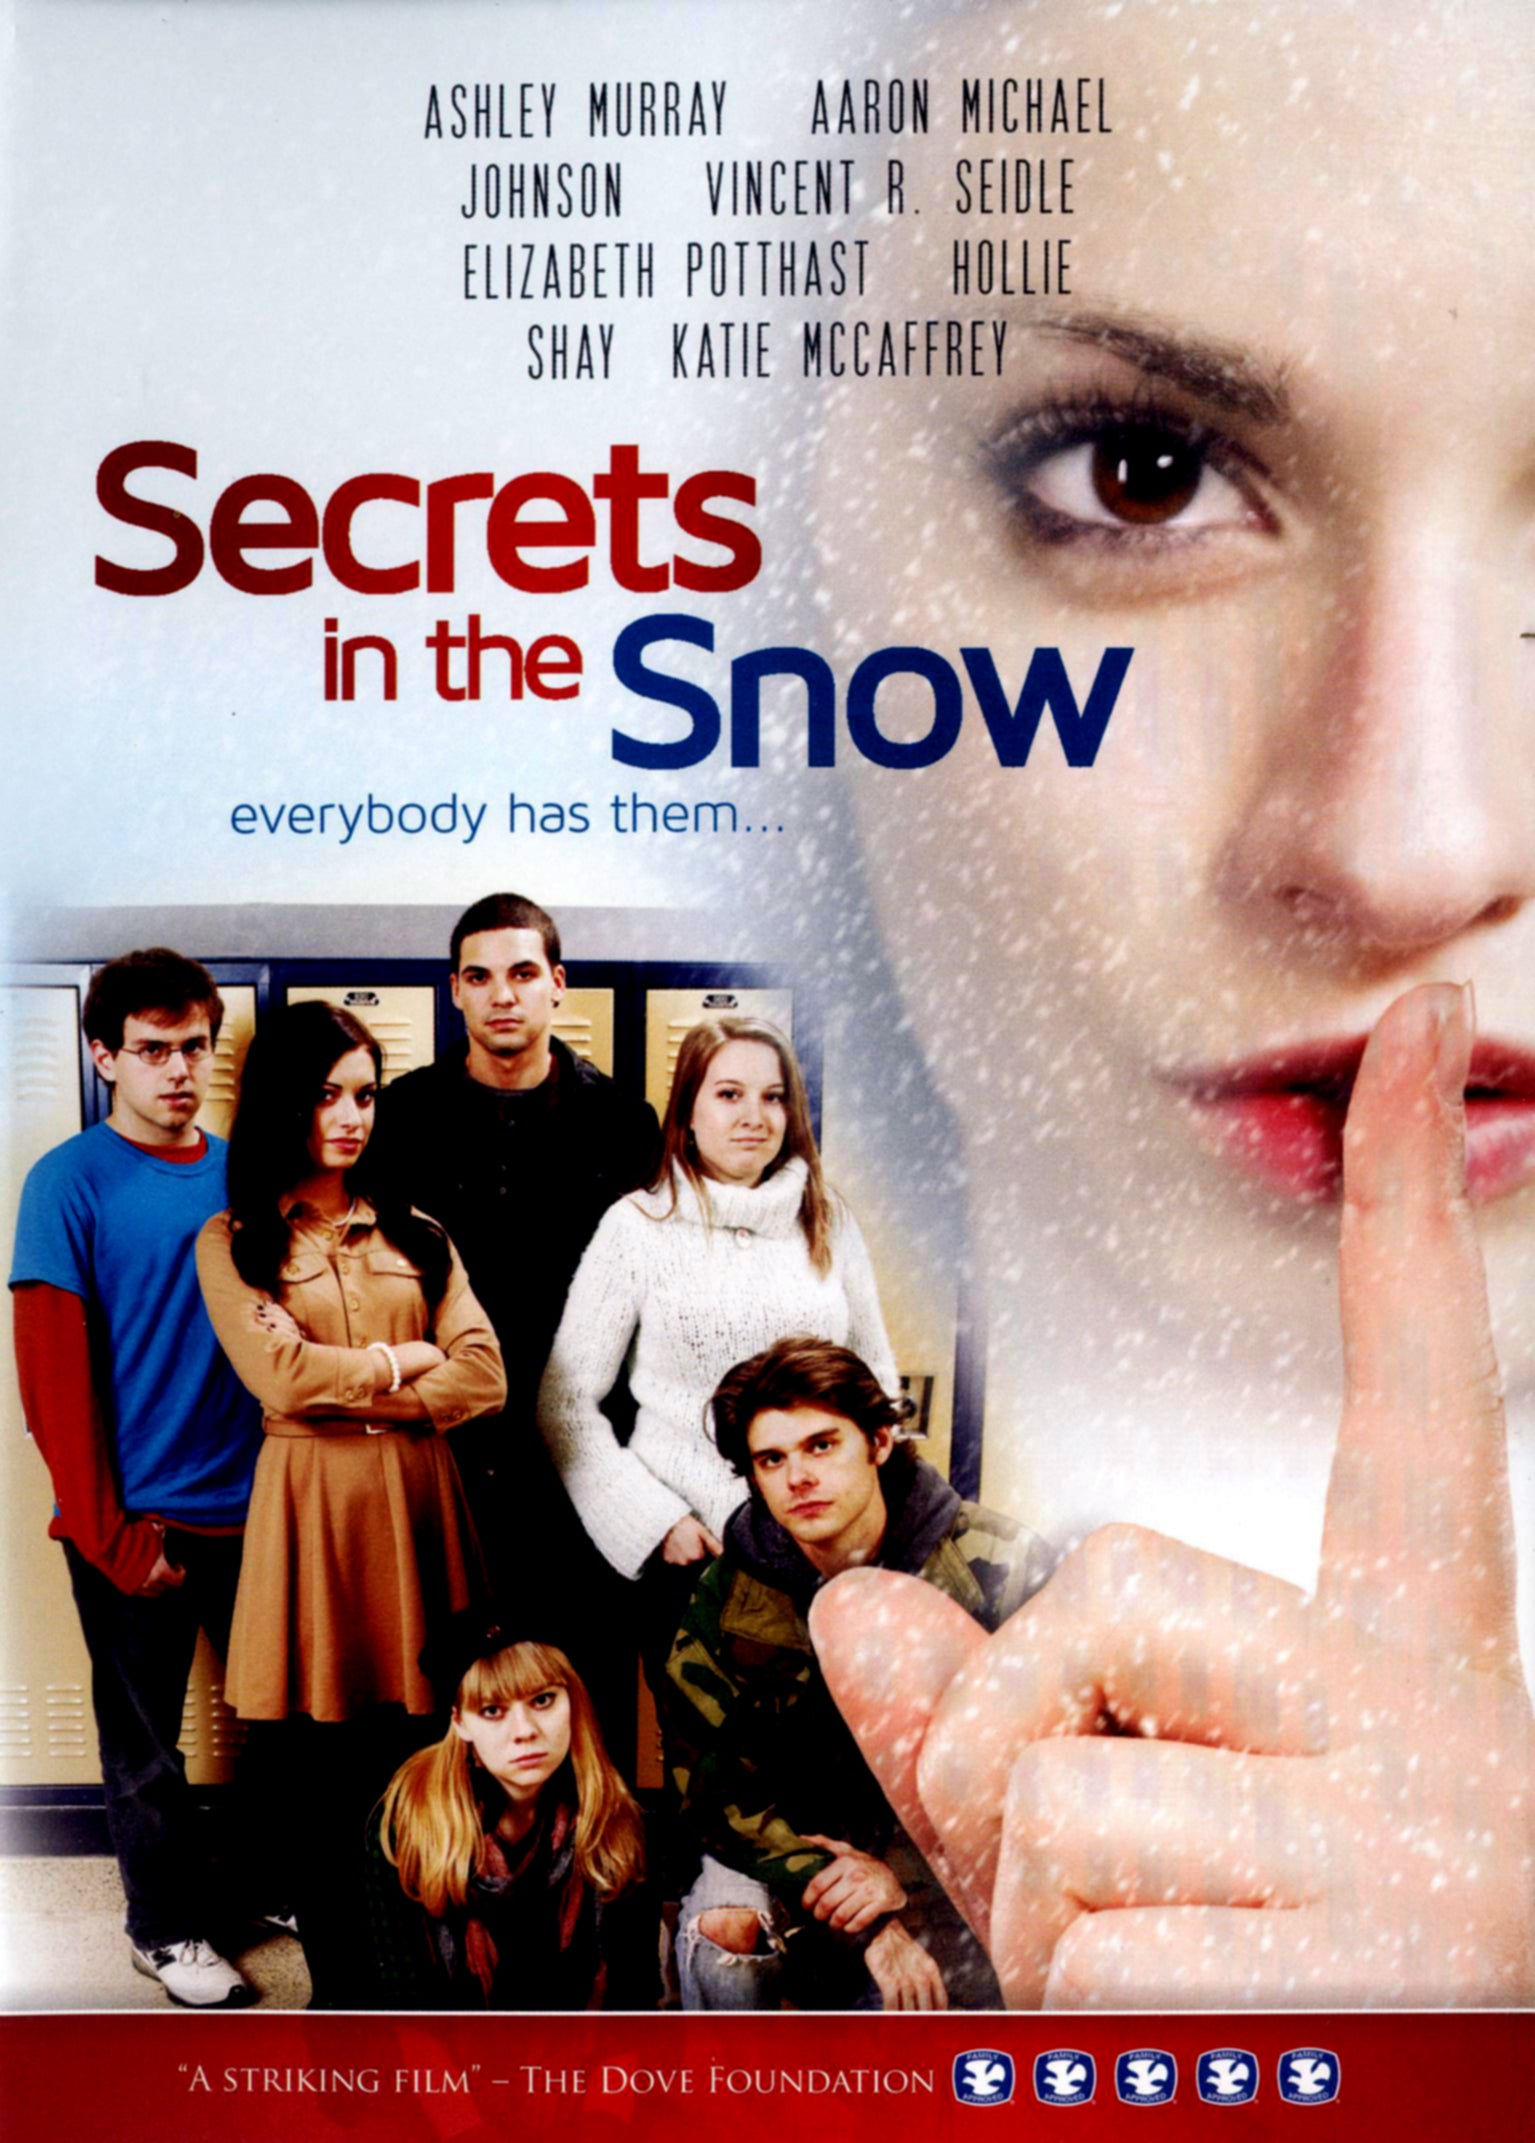 Secrets in the Snow cover art